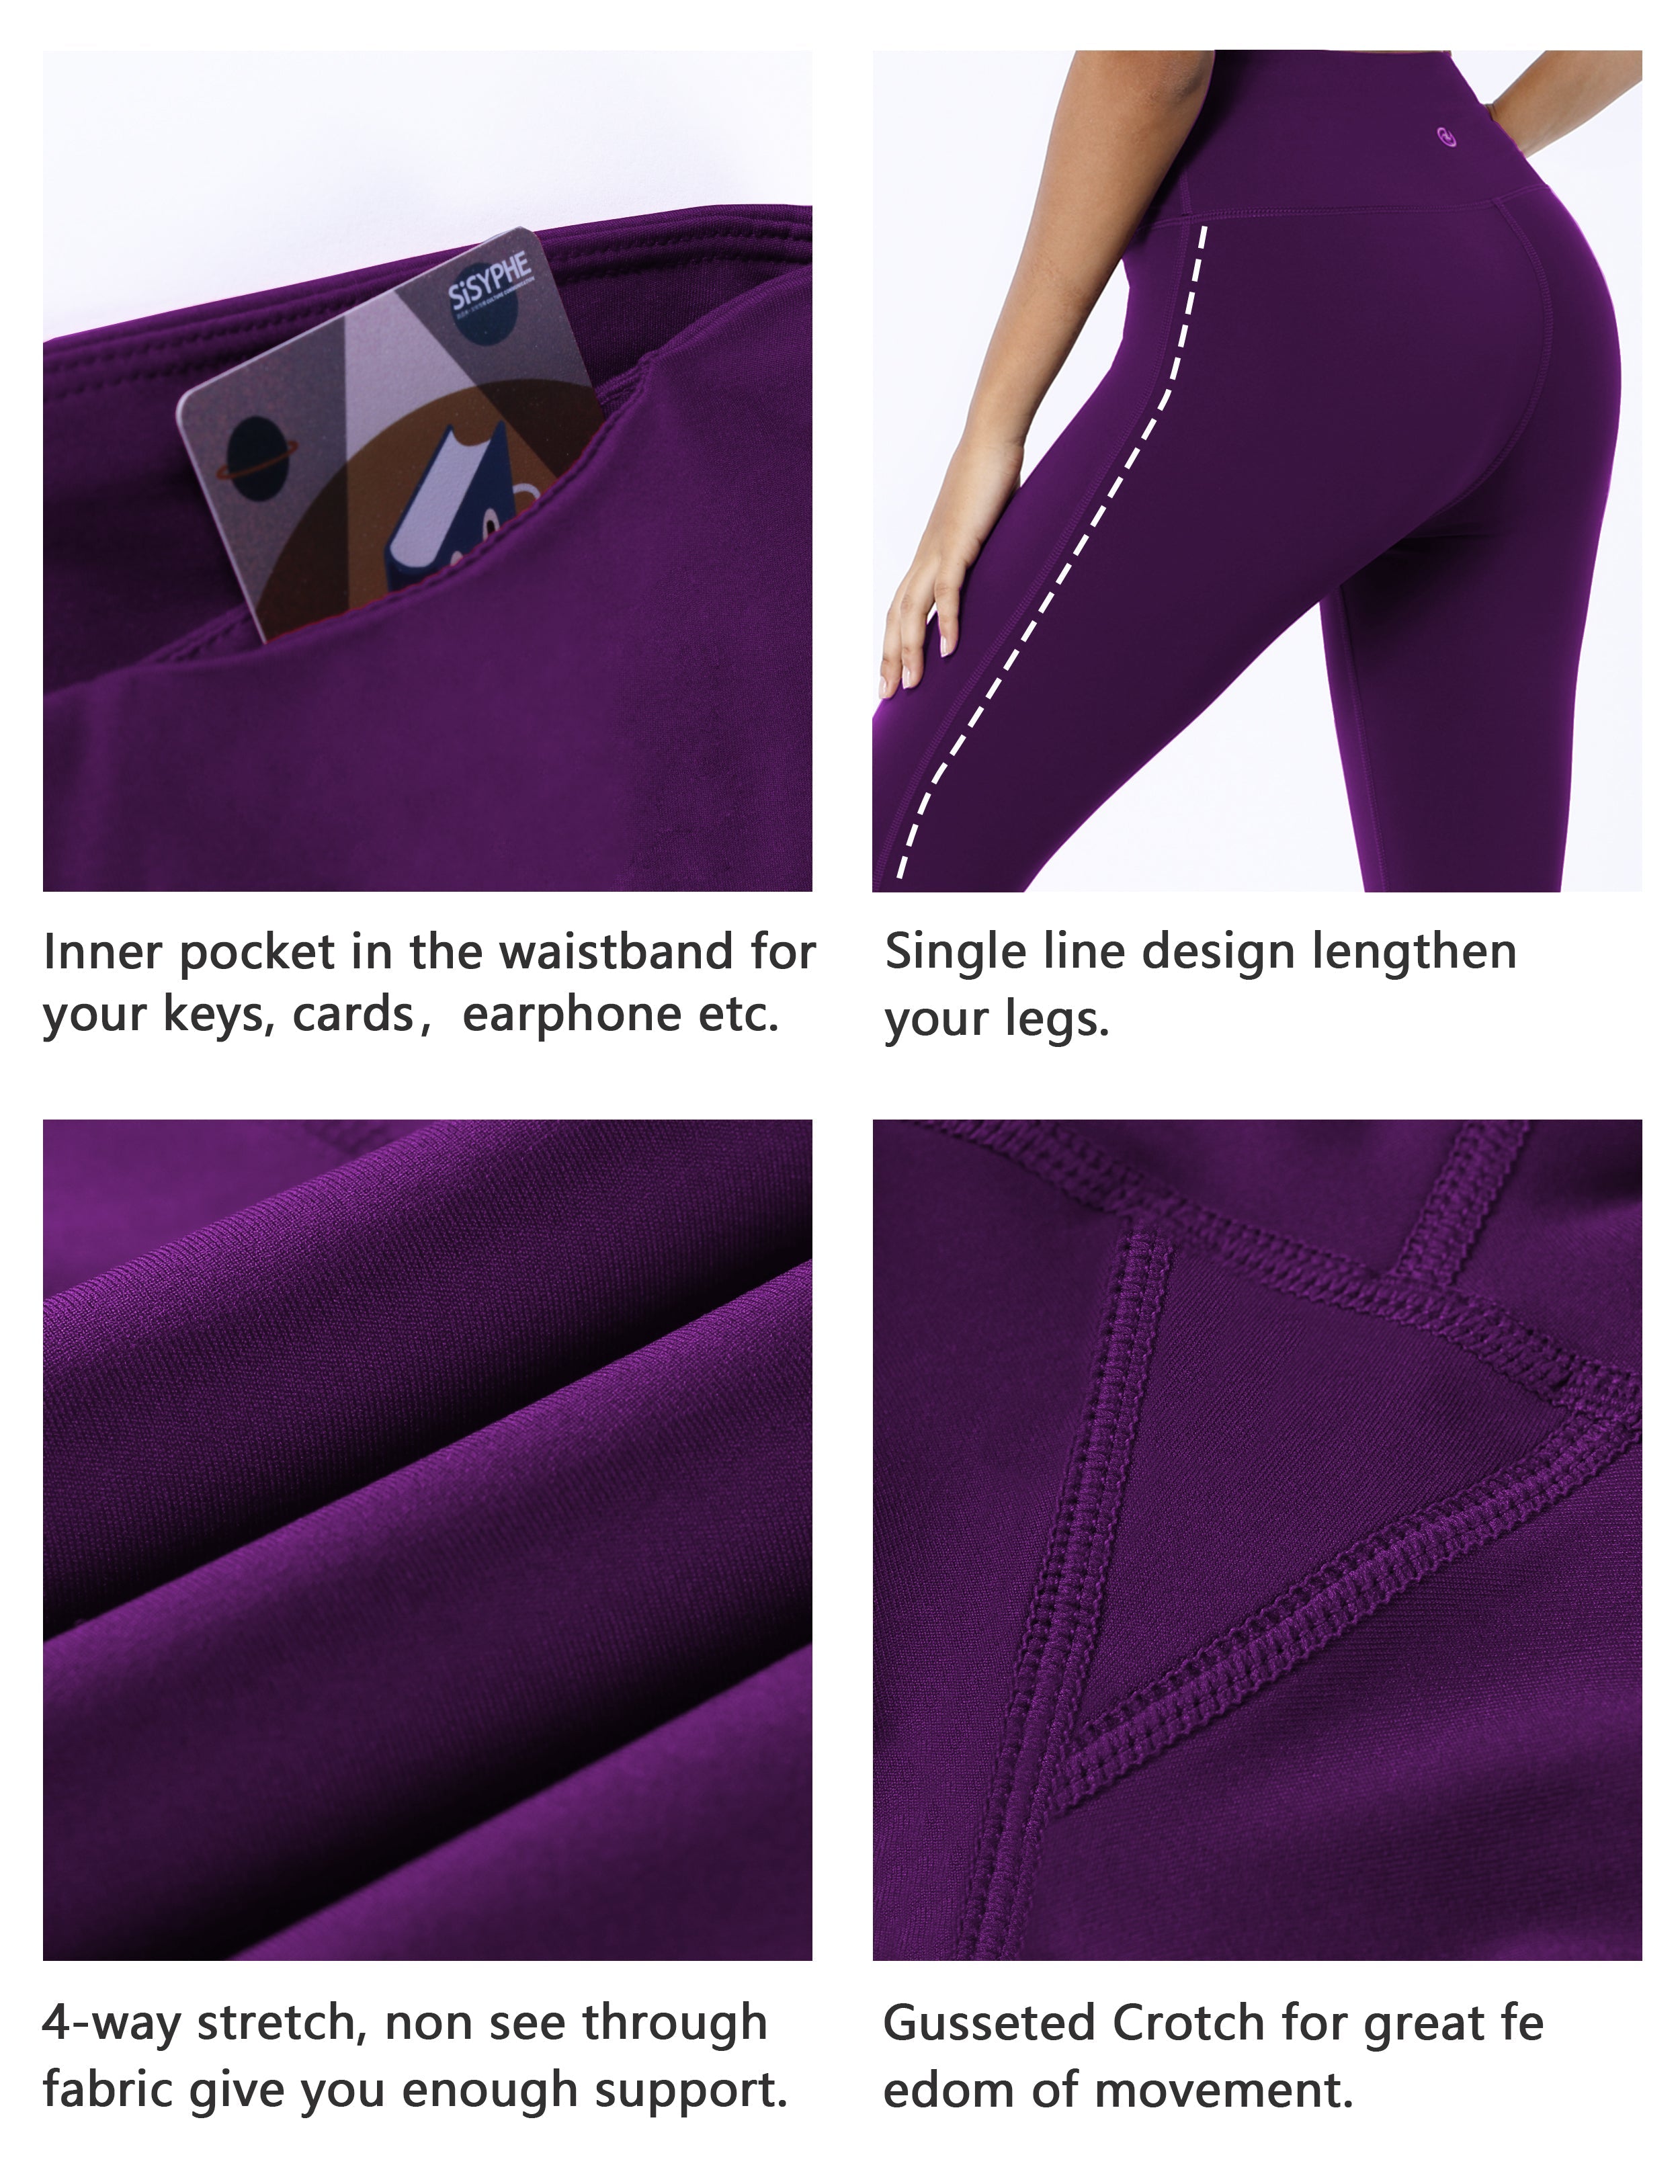 High Waist Side Line Golf Pants eggplantpurple Side Line is Make Your Legs Look Longer and Thinner 75%Nylon/25%Spandex Fabric doesn't attract lint easily 4-way stretch No see-through Moisture-wicking Tummy control Inner pocket Two lengths